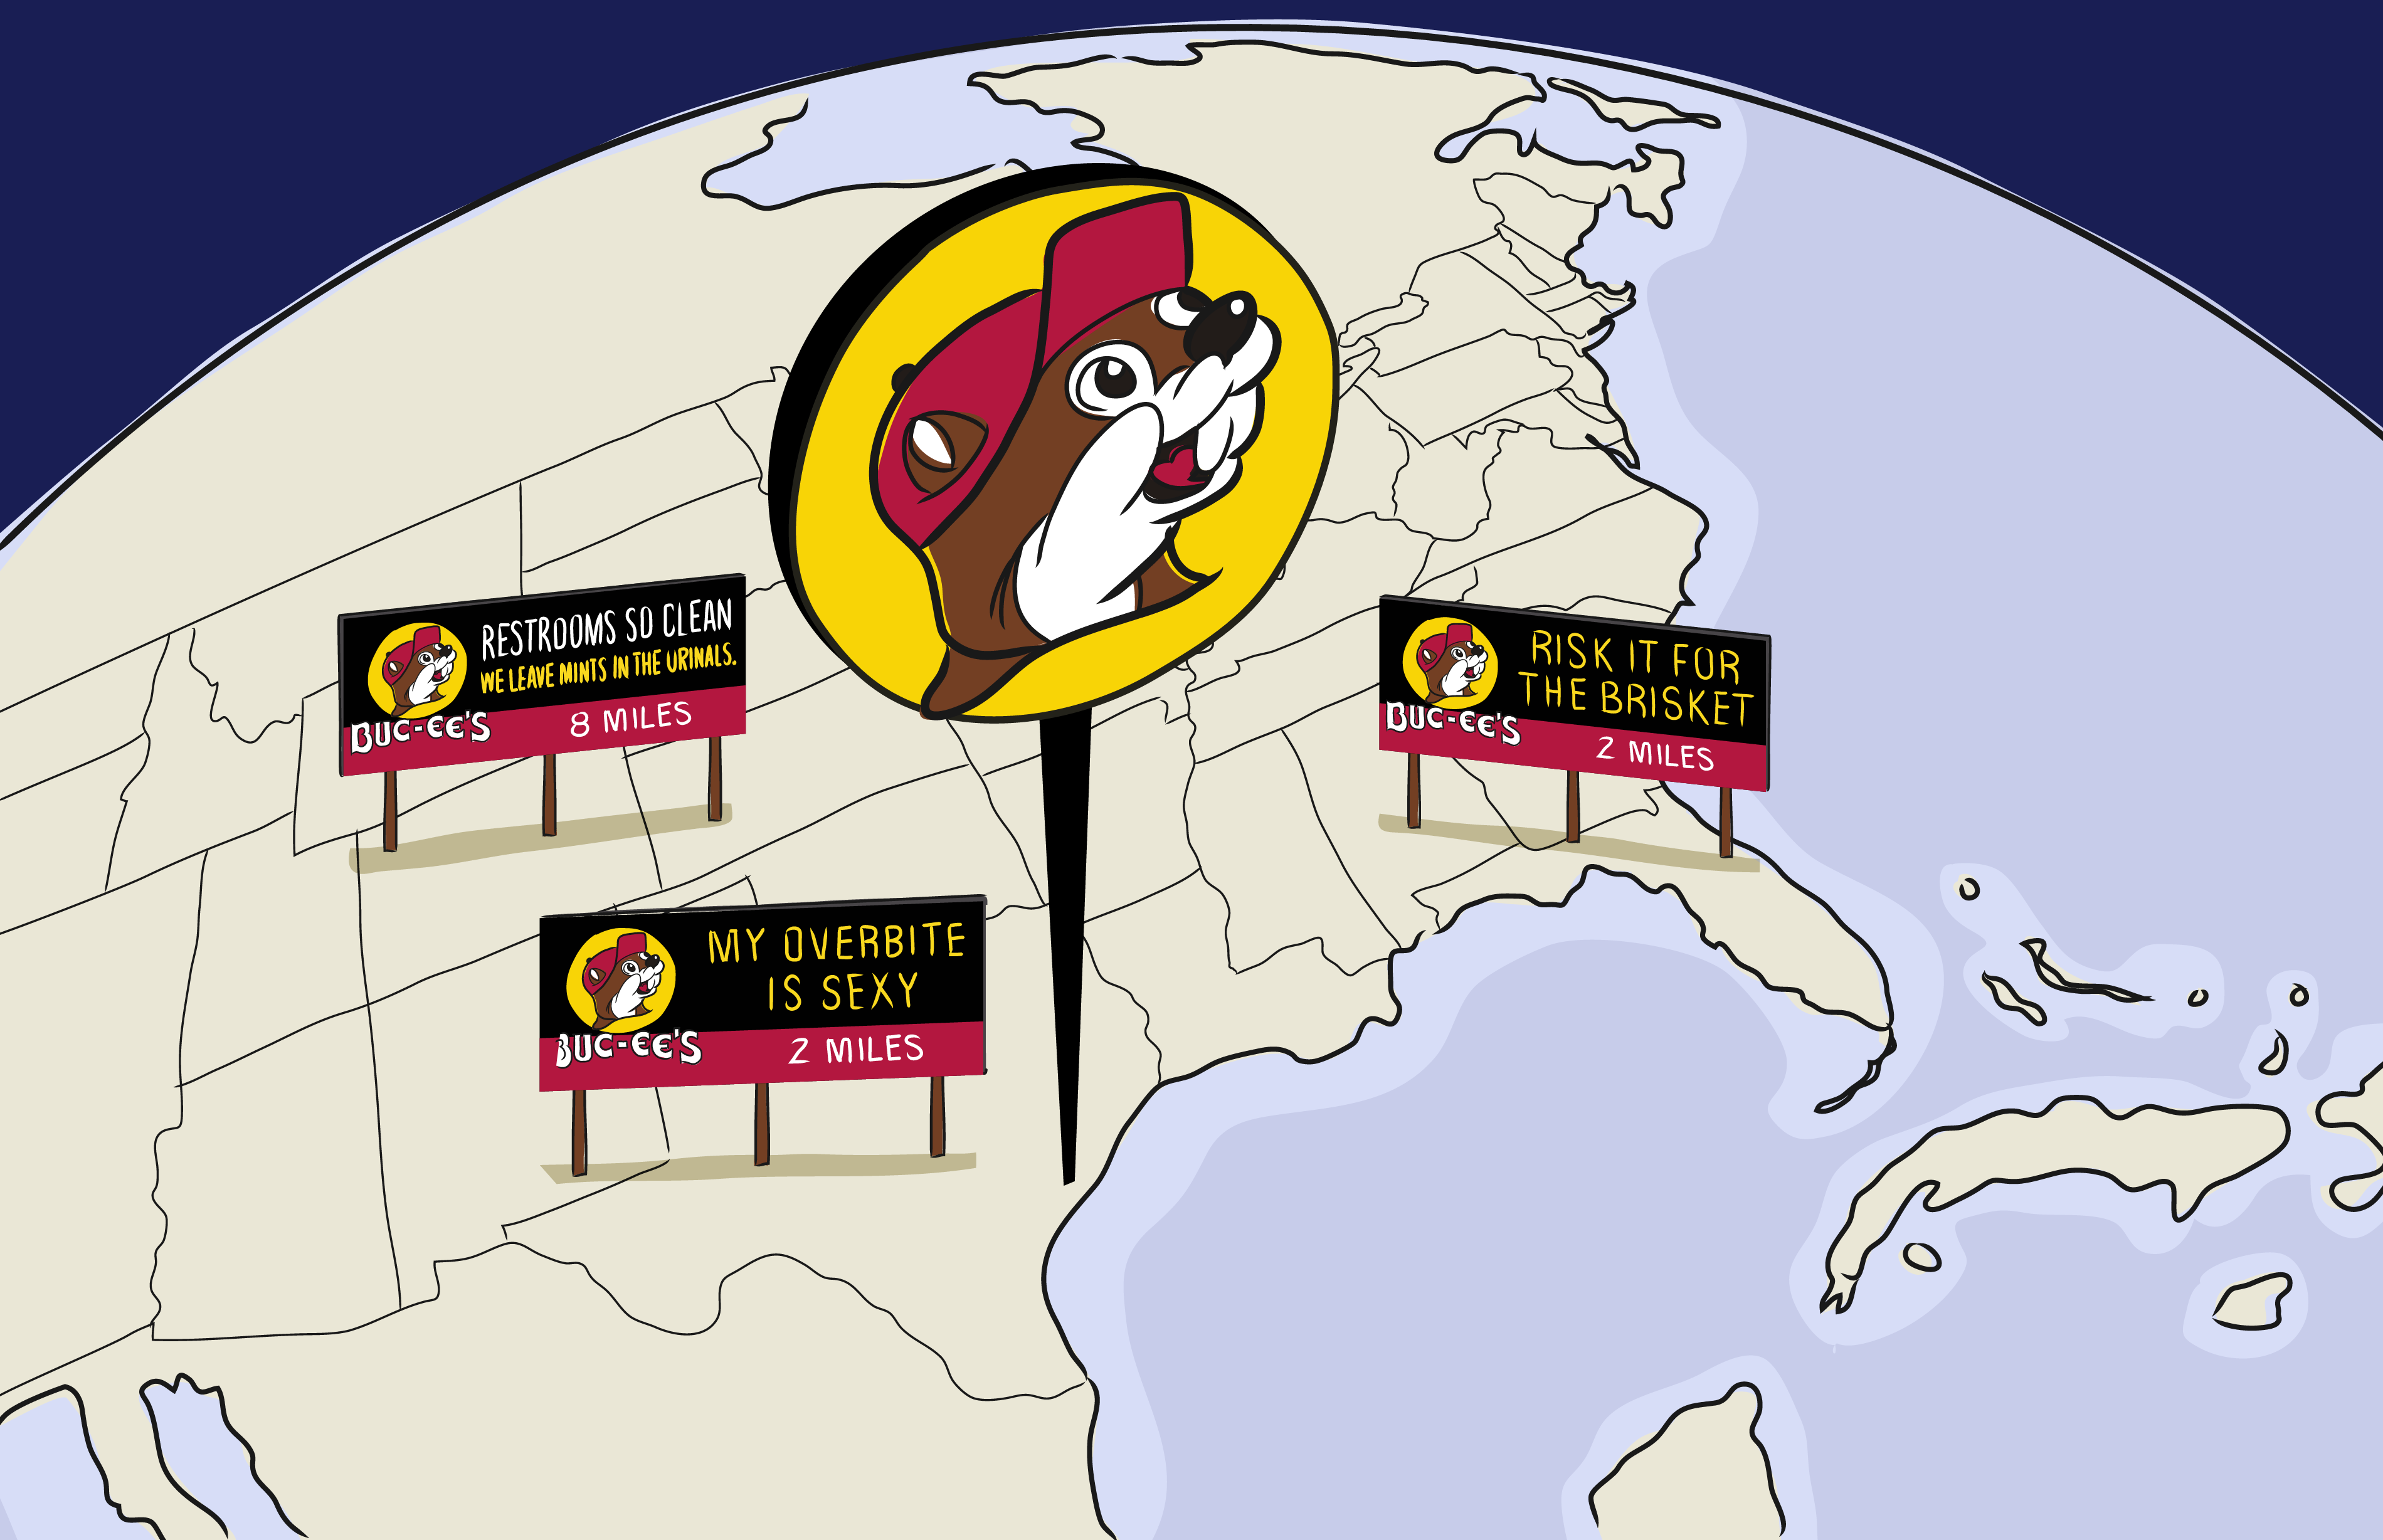 What's so great about Buc-ee's? Fans love the food, gas pumps, mascot, sparkling bathrooms